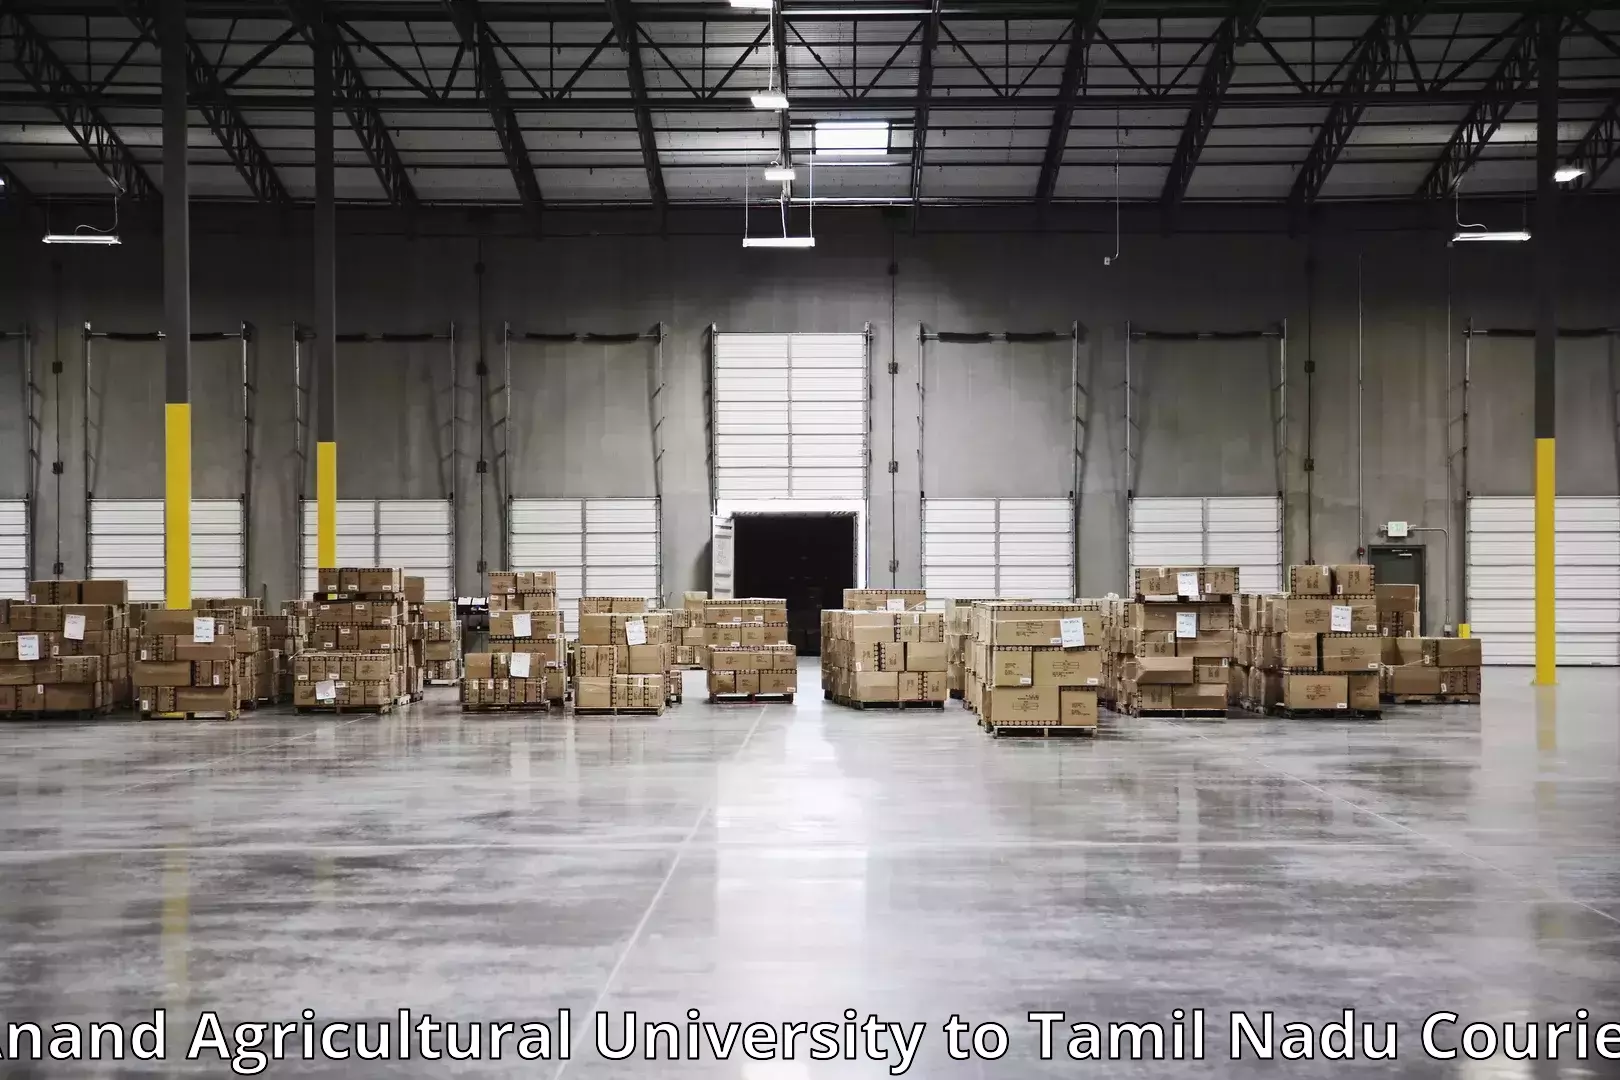 Professional moving assistance Anand Agricultural University to Mayiladuthurai